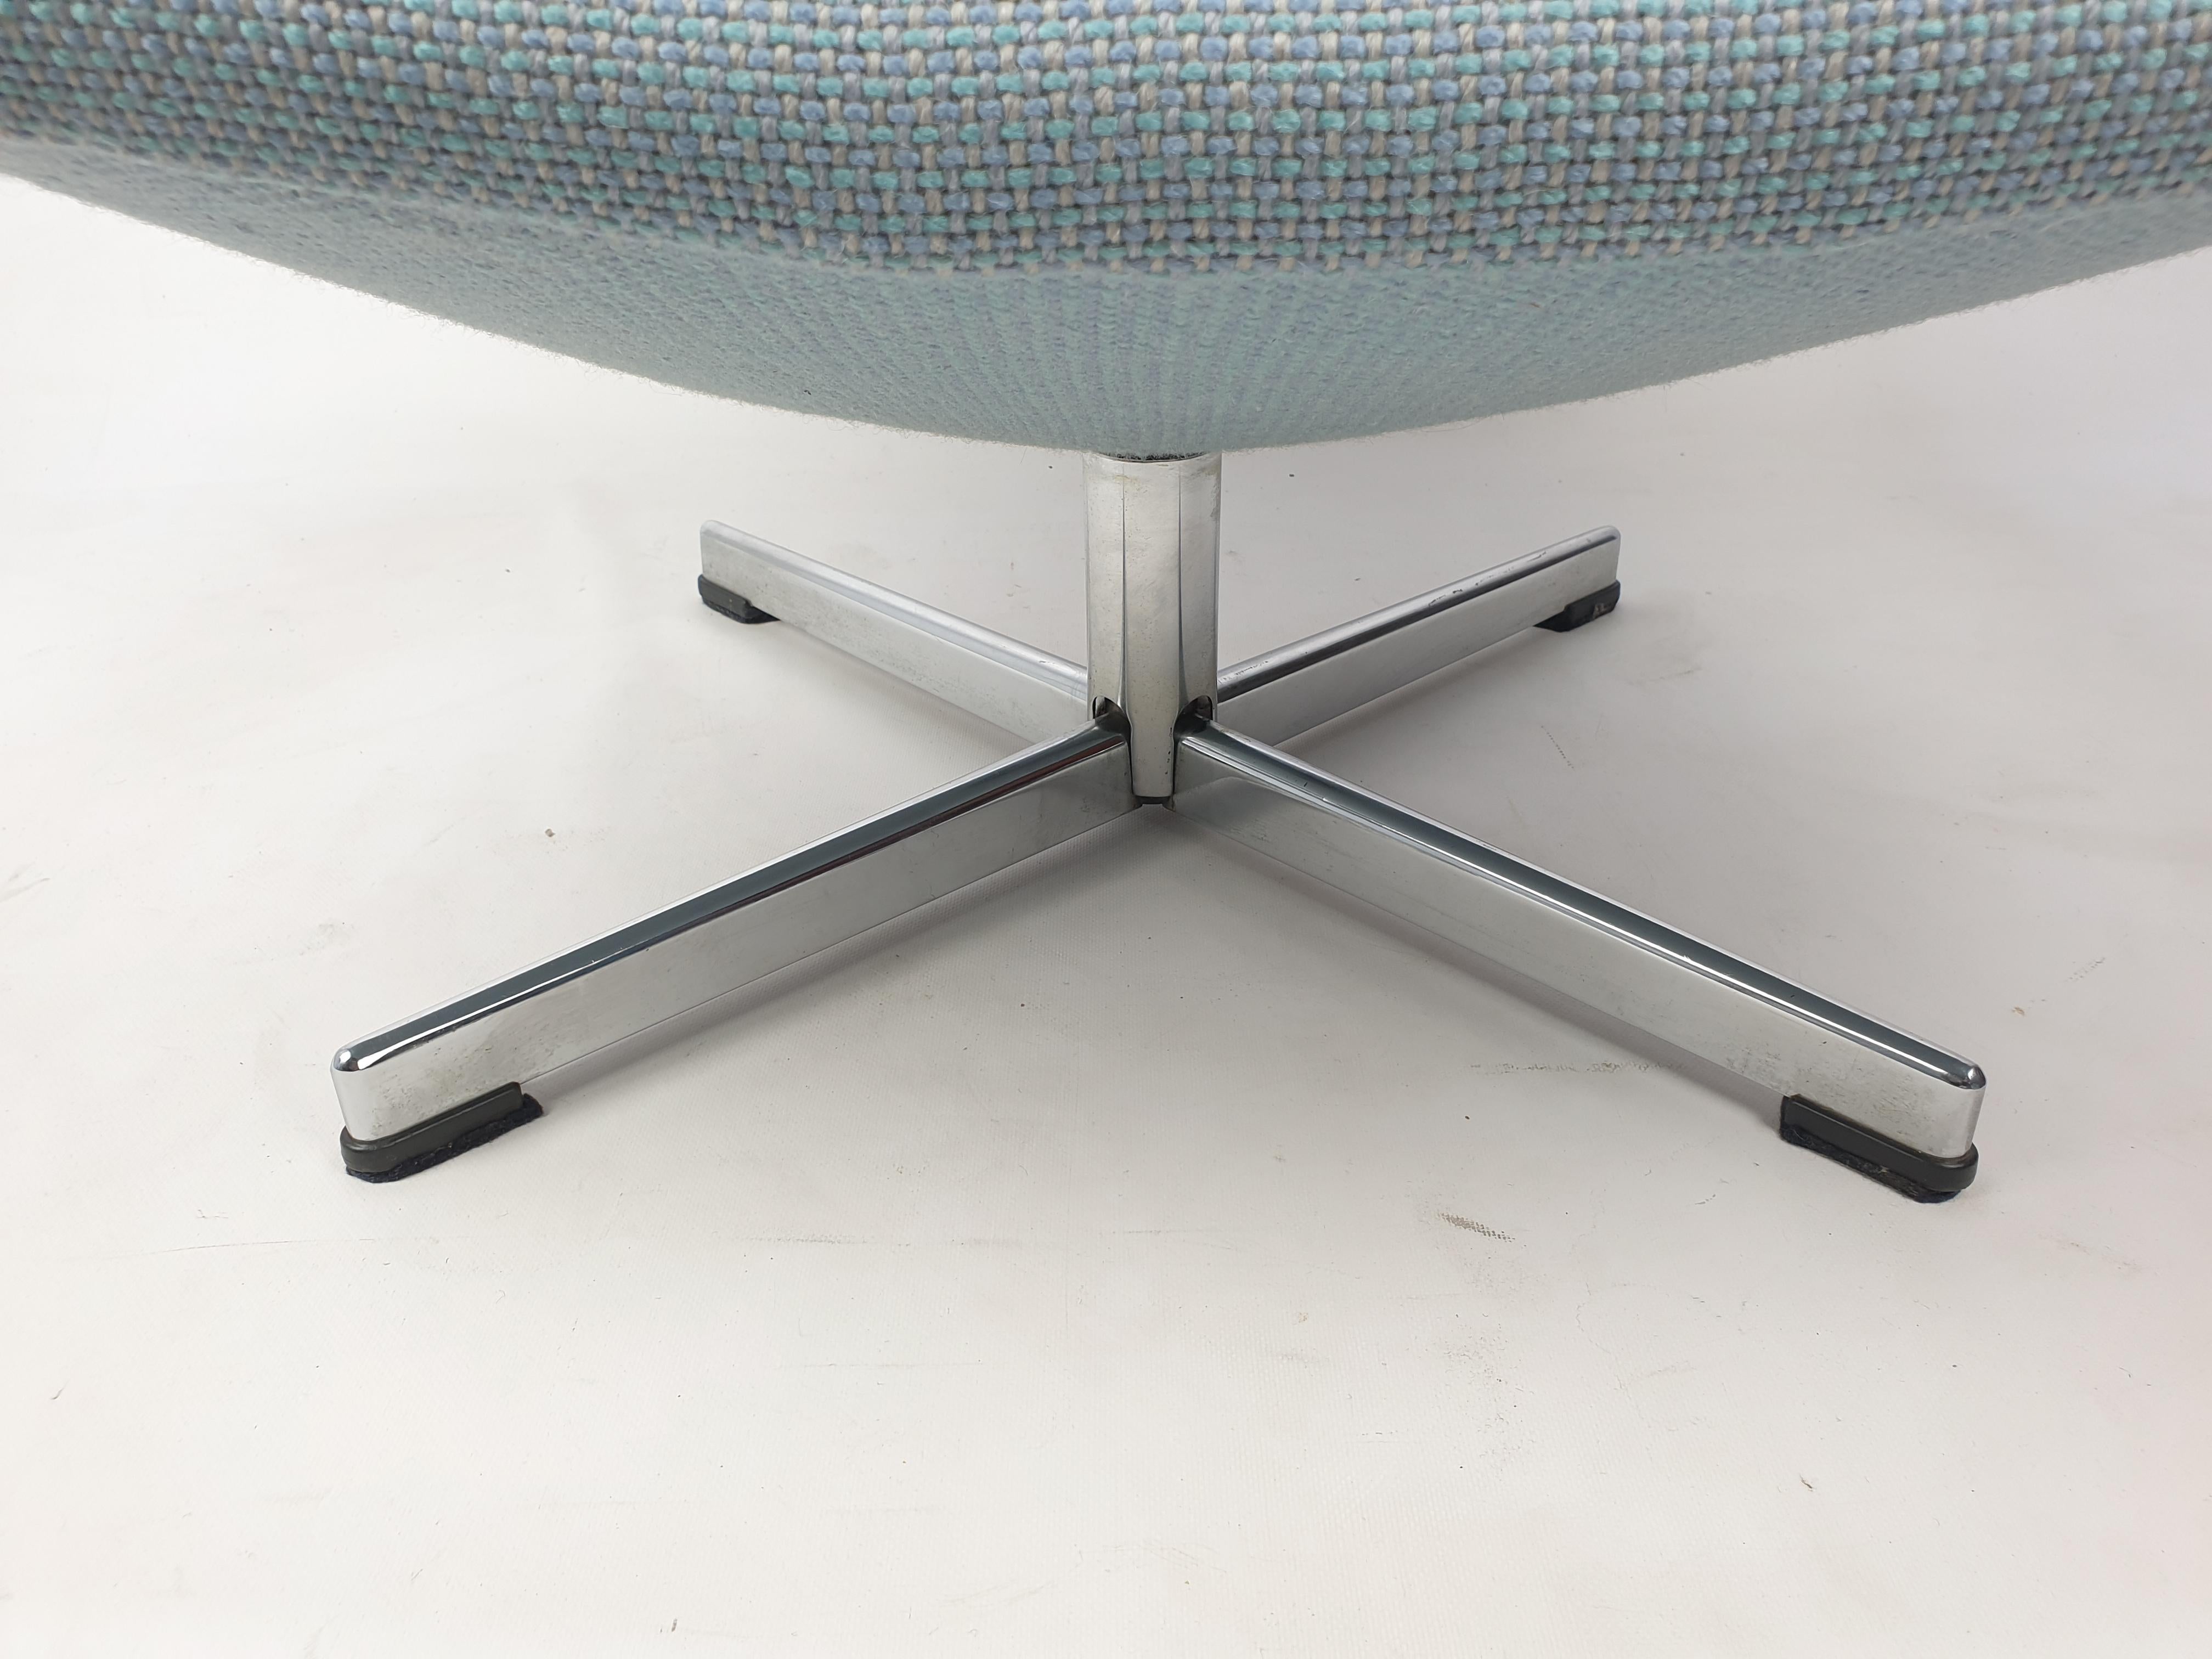 Metal Oyster Chair with Cross Base by Pierre Paulin for Artifort, 1965 For Sale